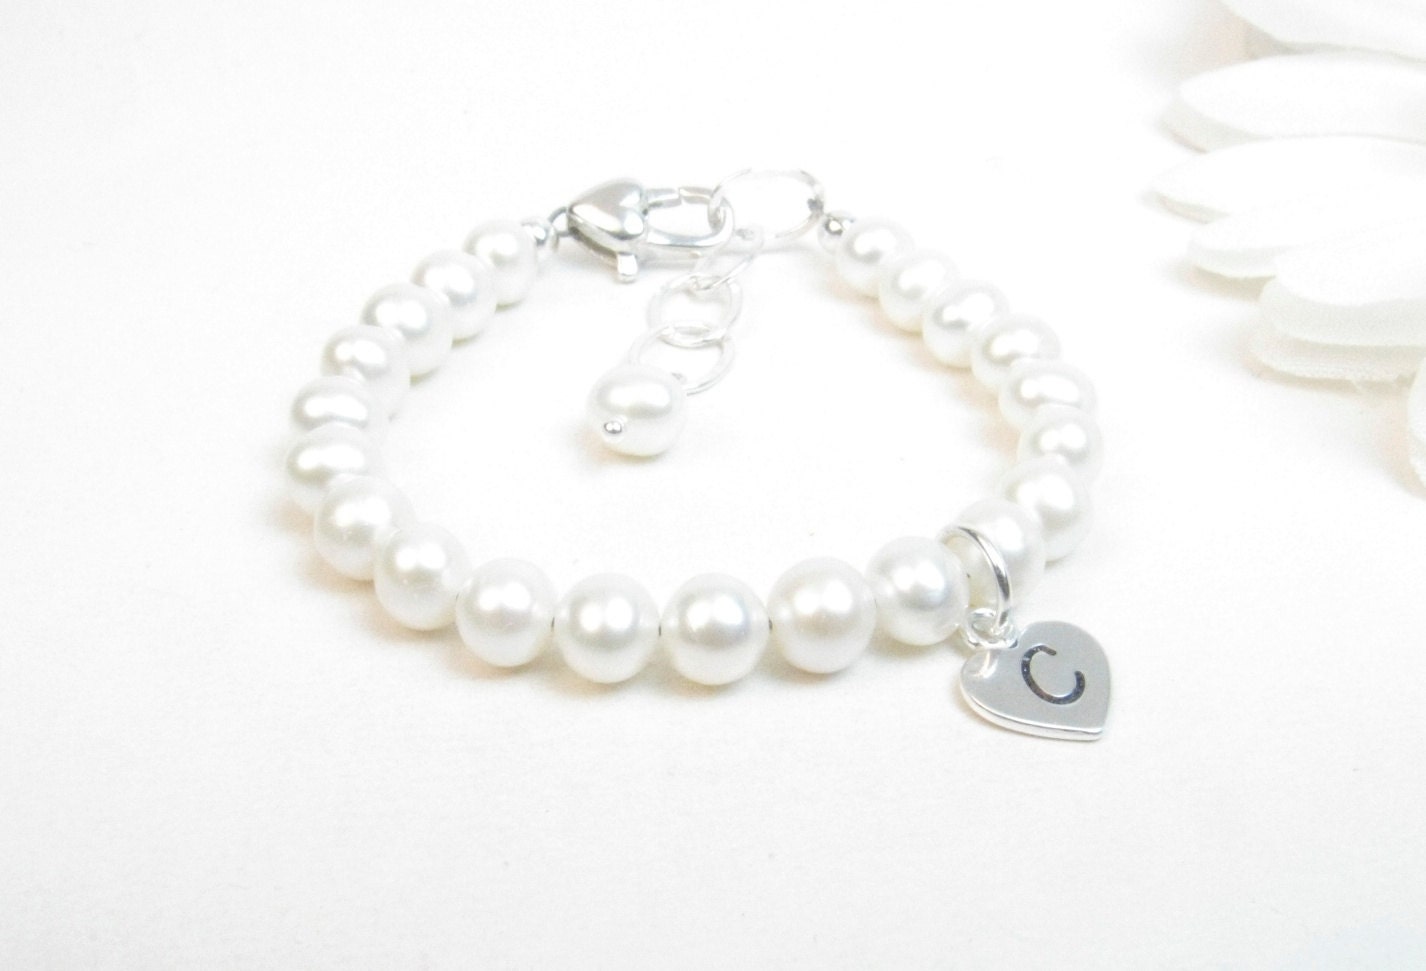 Flower Girl Bracelet with Freshwater Pearls and Hand Stamped Initial Heart Charm - pickledbeads